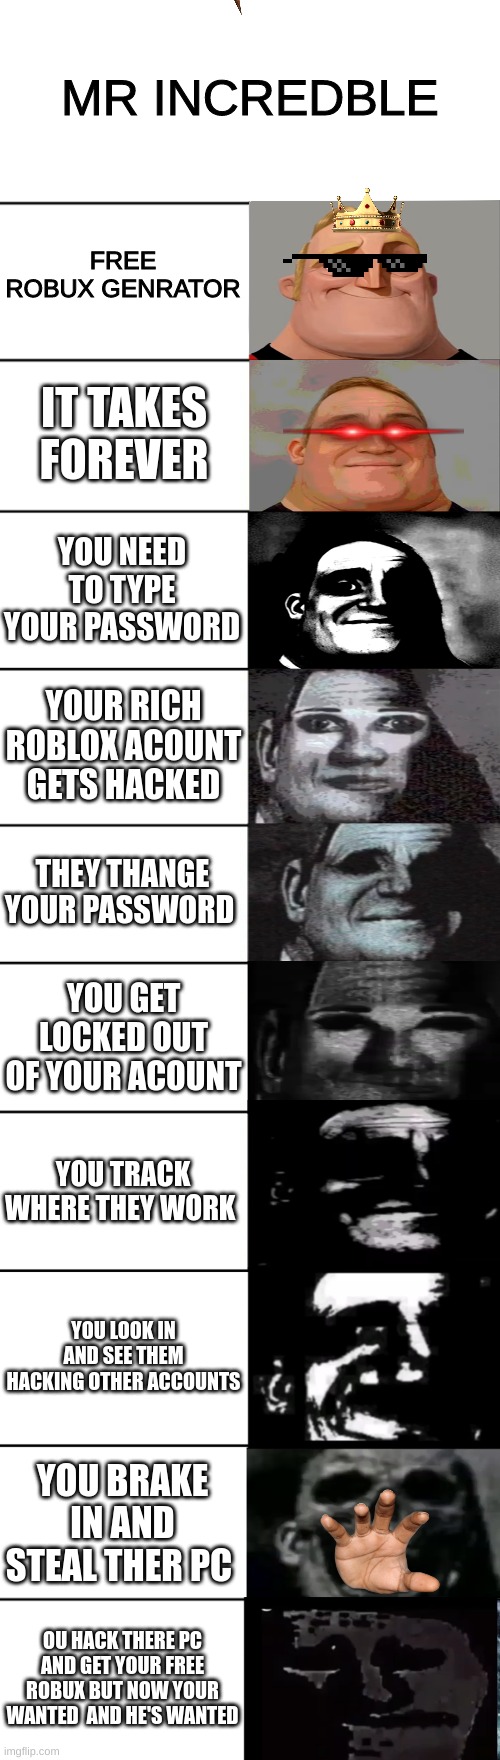 Mr. Incredible becoming uncanny | MR INCREDBLE; FREE ROBUX GENRATOR; IT TAKES FOREVER; YOU NEED TO TYPE YOUR PASSWORD; YOUR RICH ROBLOX ACOUNT GETS HACKED; THEY THANGE YOUR PASSWORD; YOU GET LOCKED OUT OF YOUR ACOUNT; YOU TRACK WHERE THEY WORK; YOU LOOK IN AND SEE THEM HACKING OTHER ACCOUNTS; YOU BRAKE IN AND STEAL THER PC; OU HACK THERE PC AND GET YOUR FREE ROBUX BUT NOW YOUR WANTED  AND HE'S WANTED | image tagged in mr incredible becoming uncanny | made w/ Imgflip meme maker